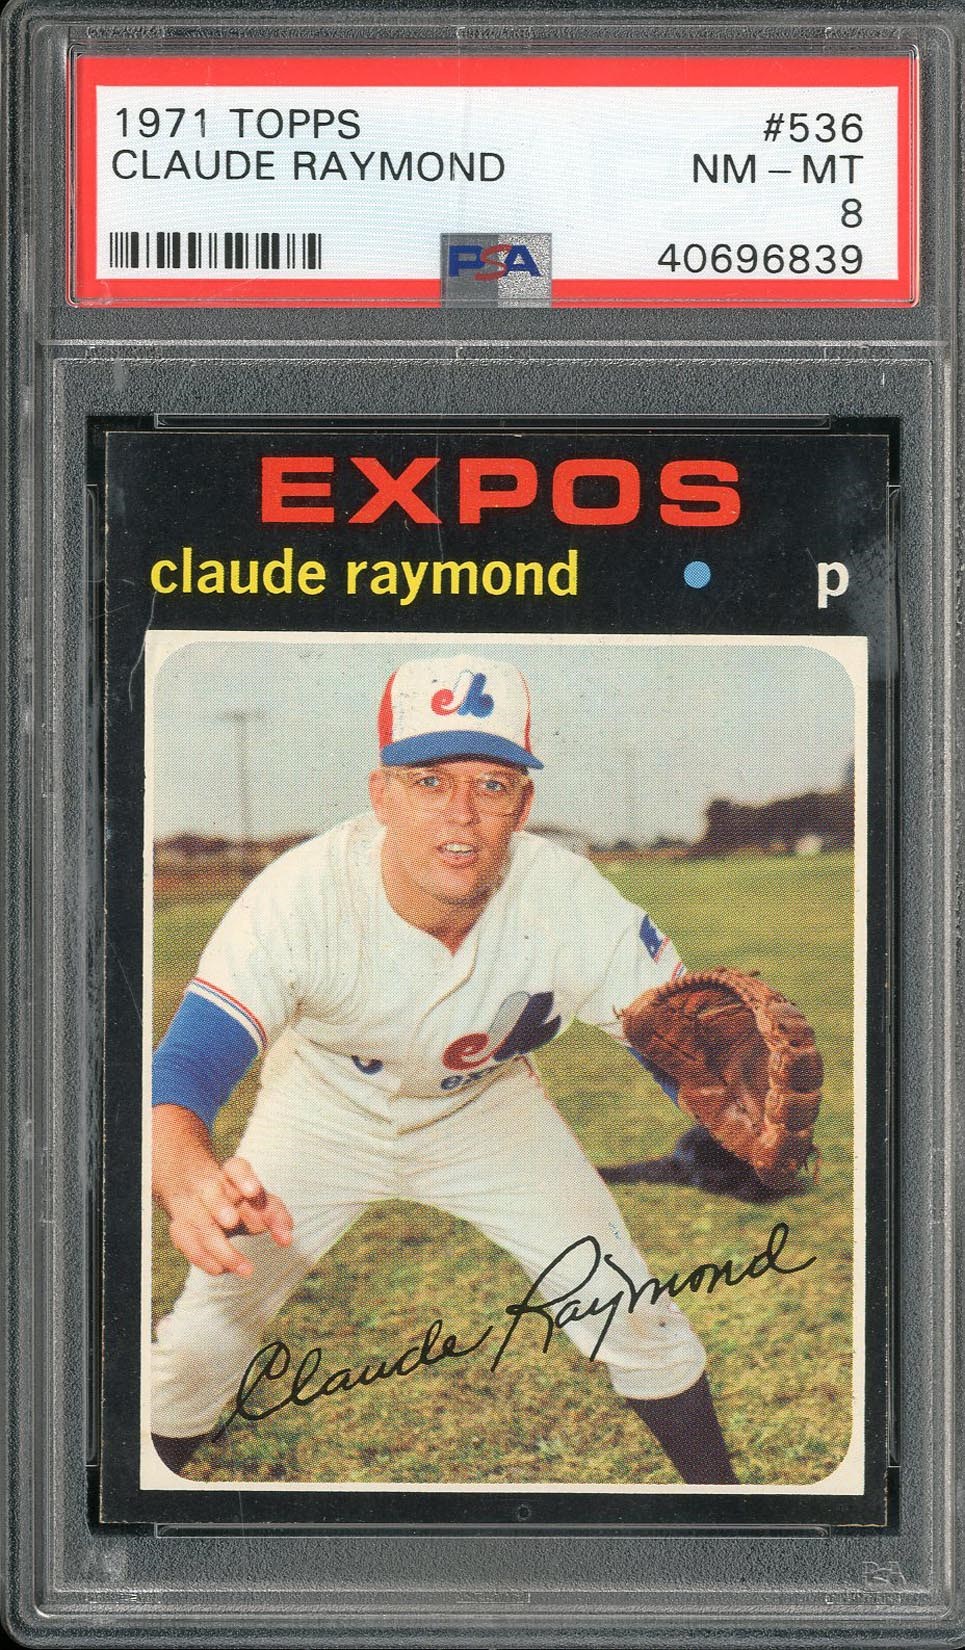 Baseball and Trading Cards - 1971 Topps #536 Claude Raymond - PSA NM-MT 8